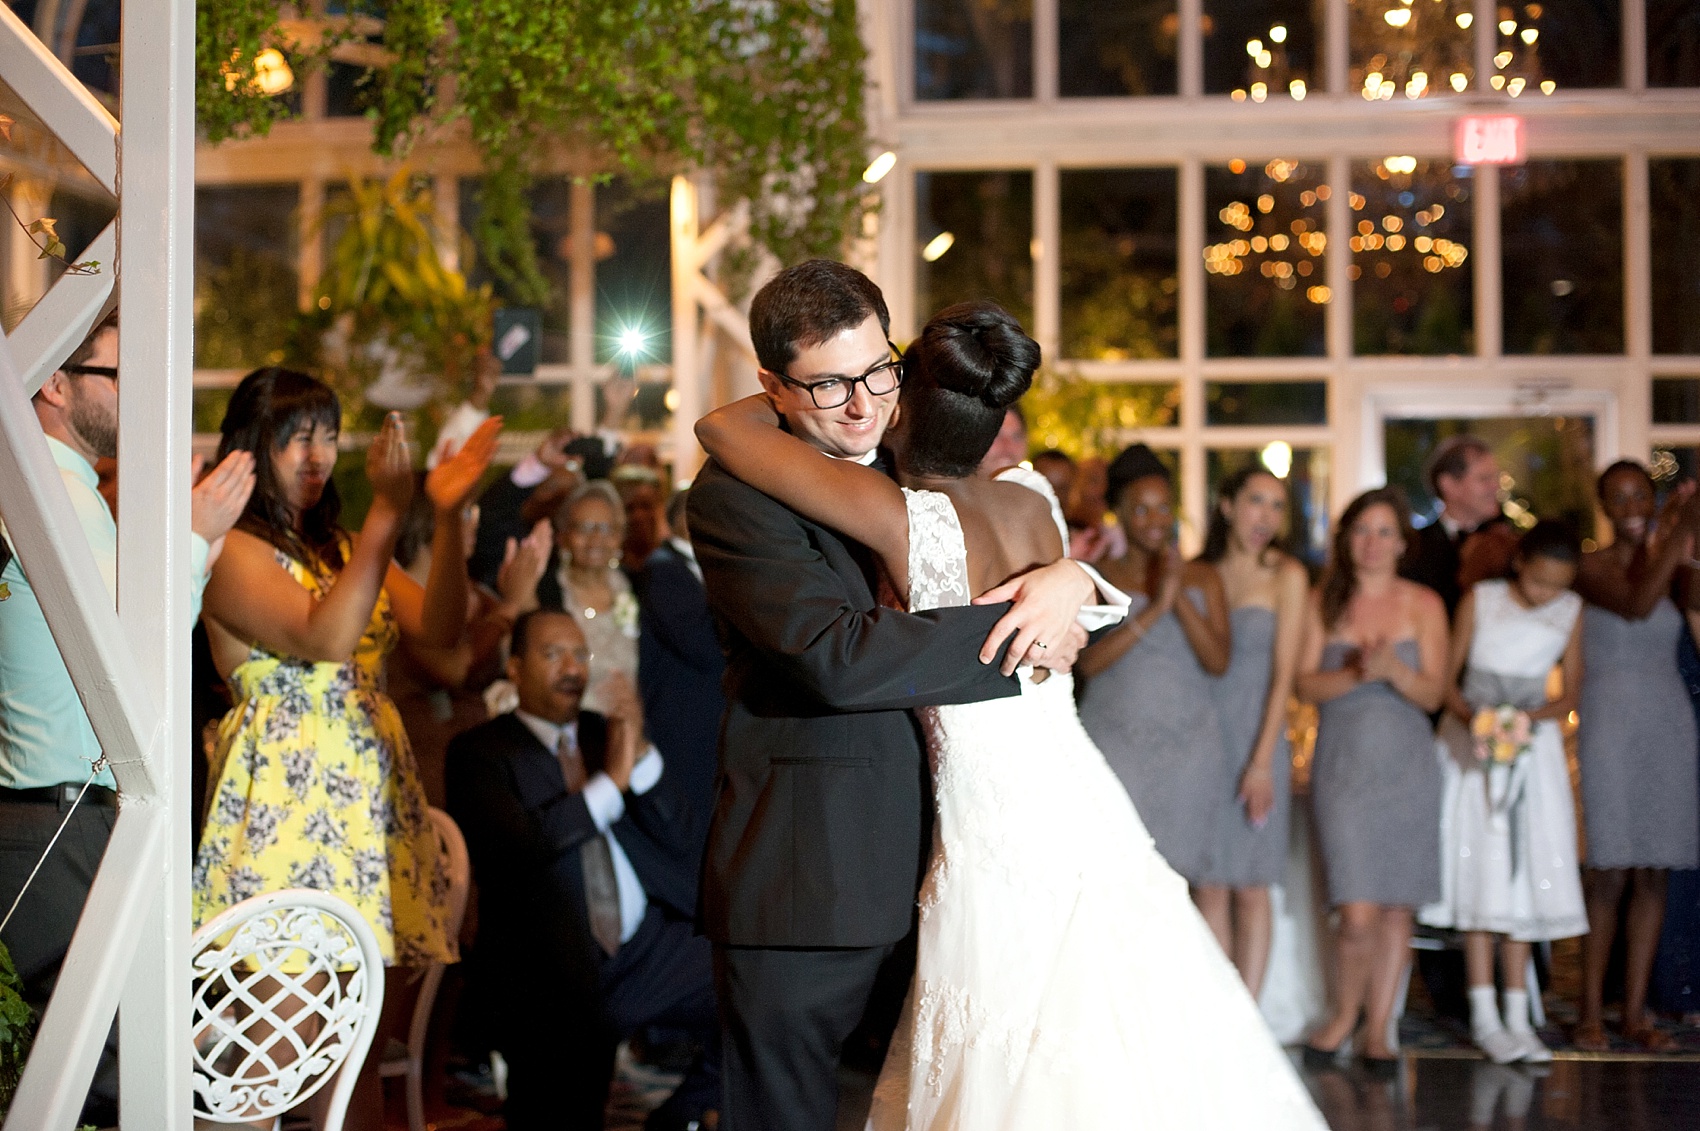 Wedding reception at the Conservatory at The Madison Hotel, New Jersey. Photos by Mikkel Paige Photography.